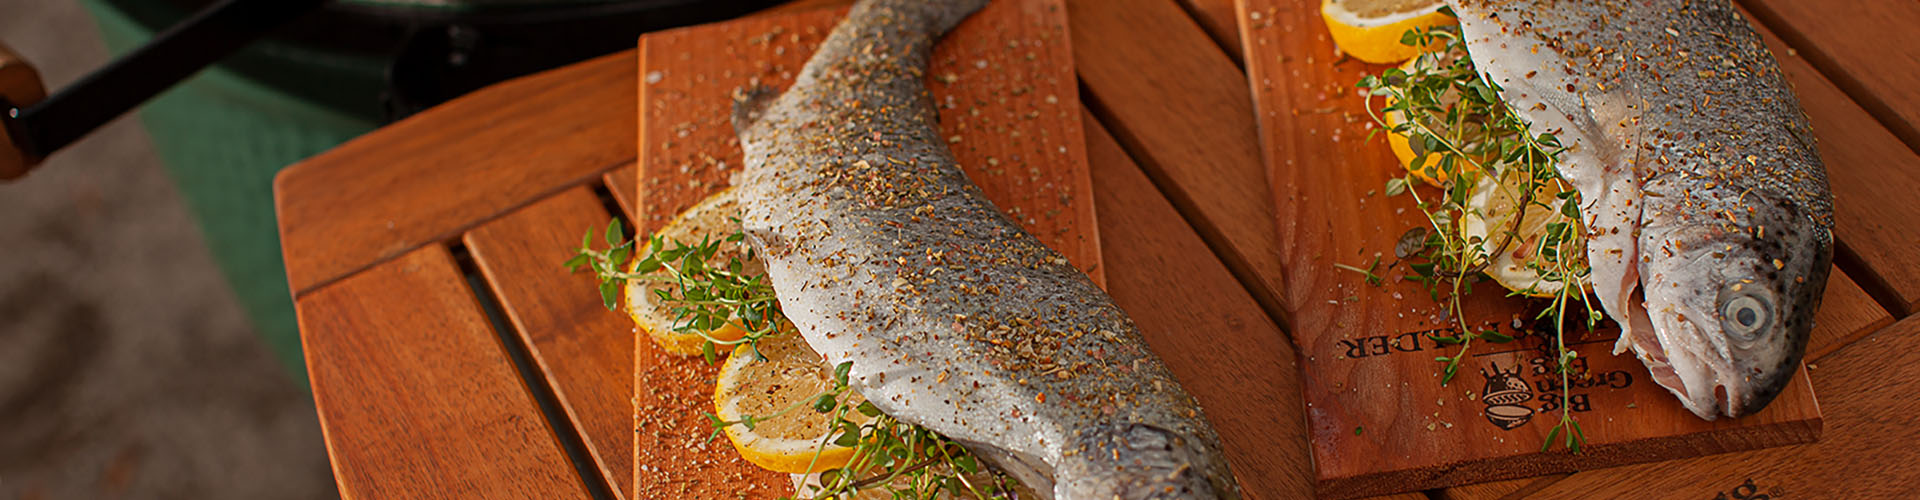 Big Green Egg Grill Recipes | Cedar Planked Trout Featured Image